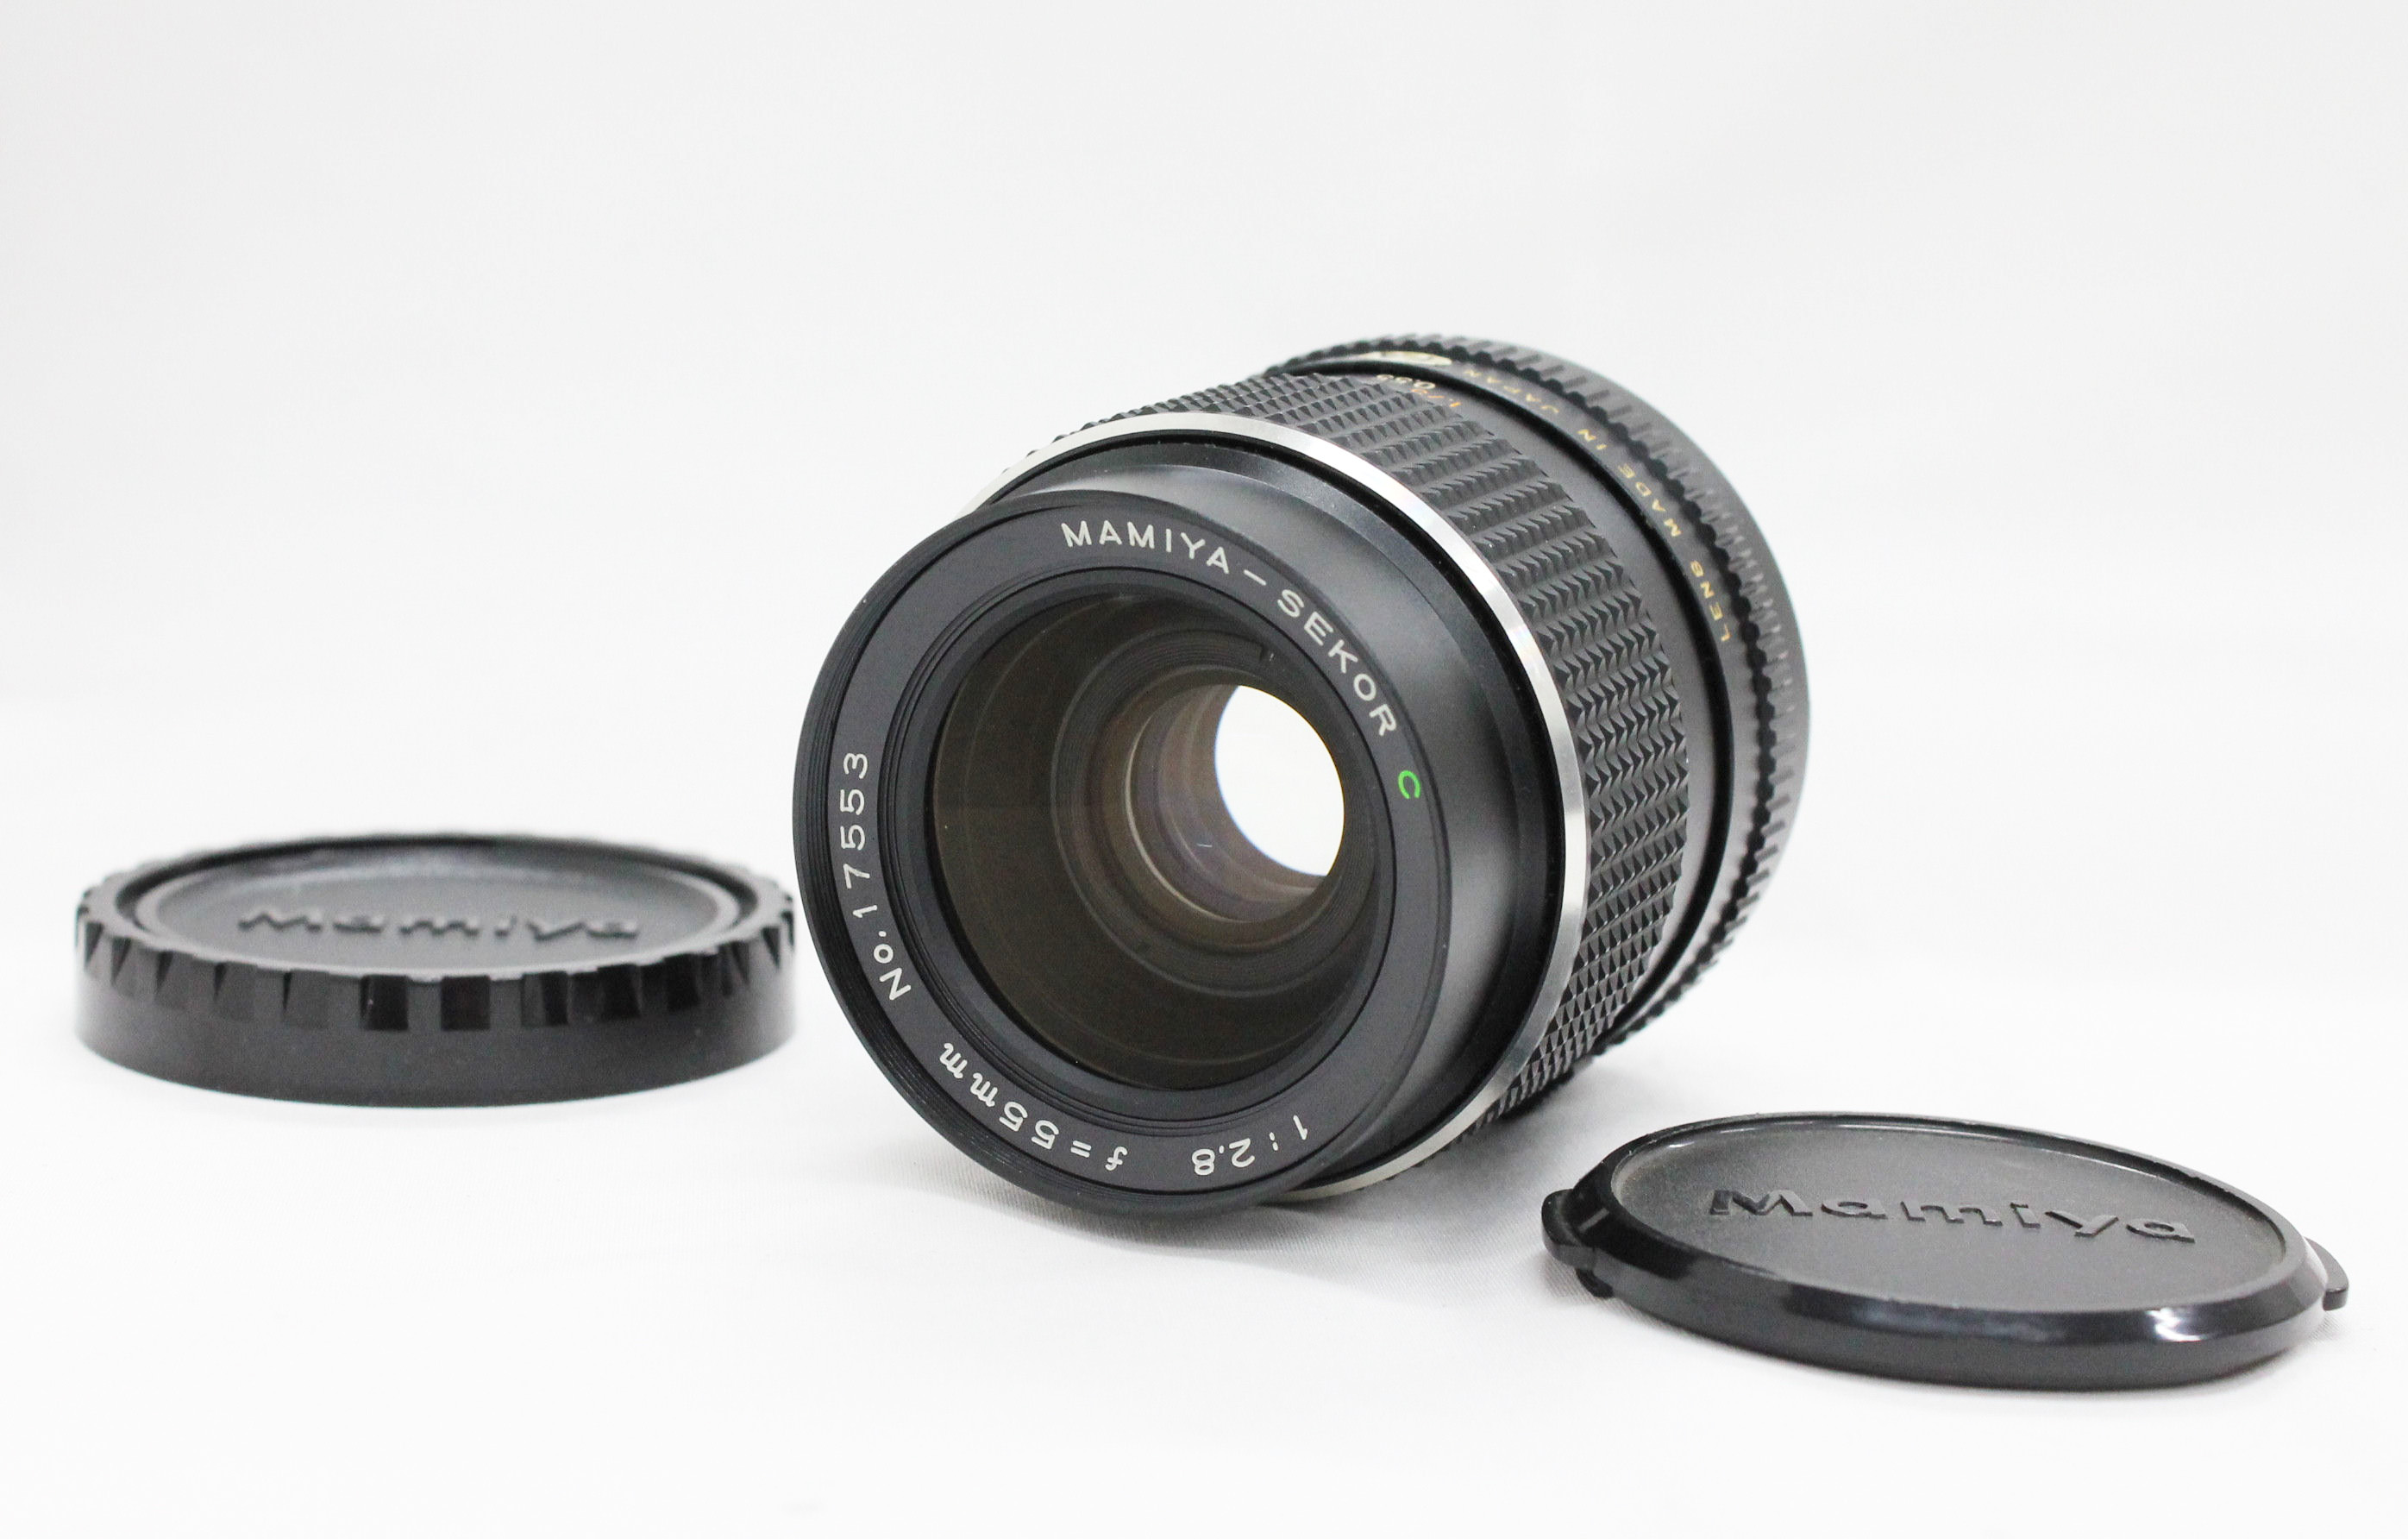 Japan Used Camera Shop | [Mint] Mamiya Sekor C 55mm F/2.8 Lens for M645 1000s Super Pro TL from Japan